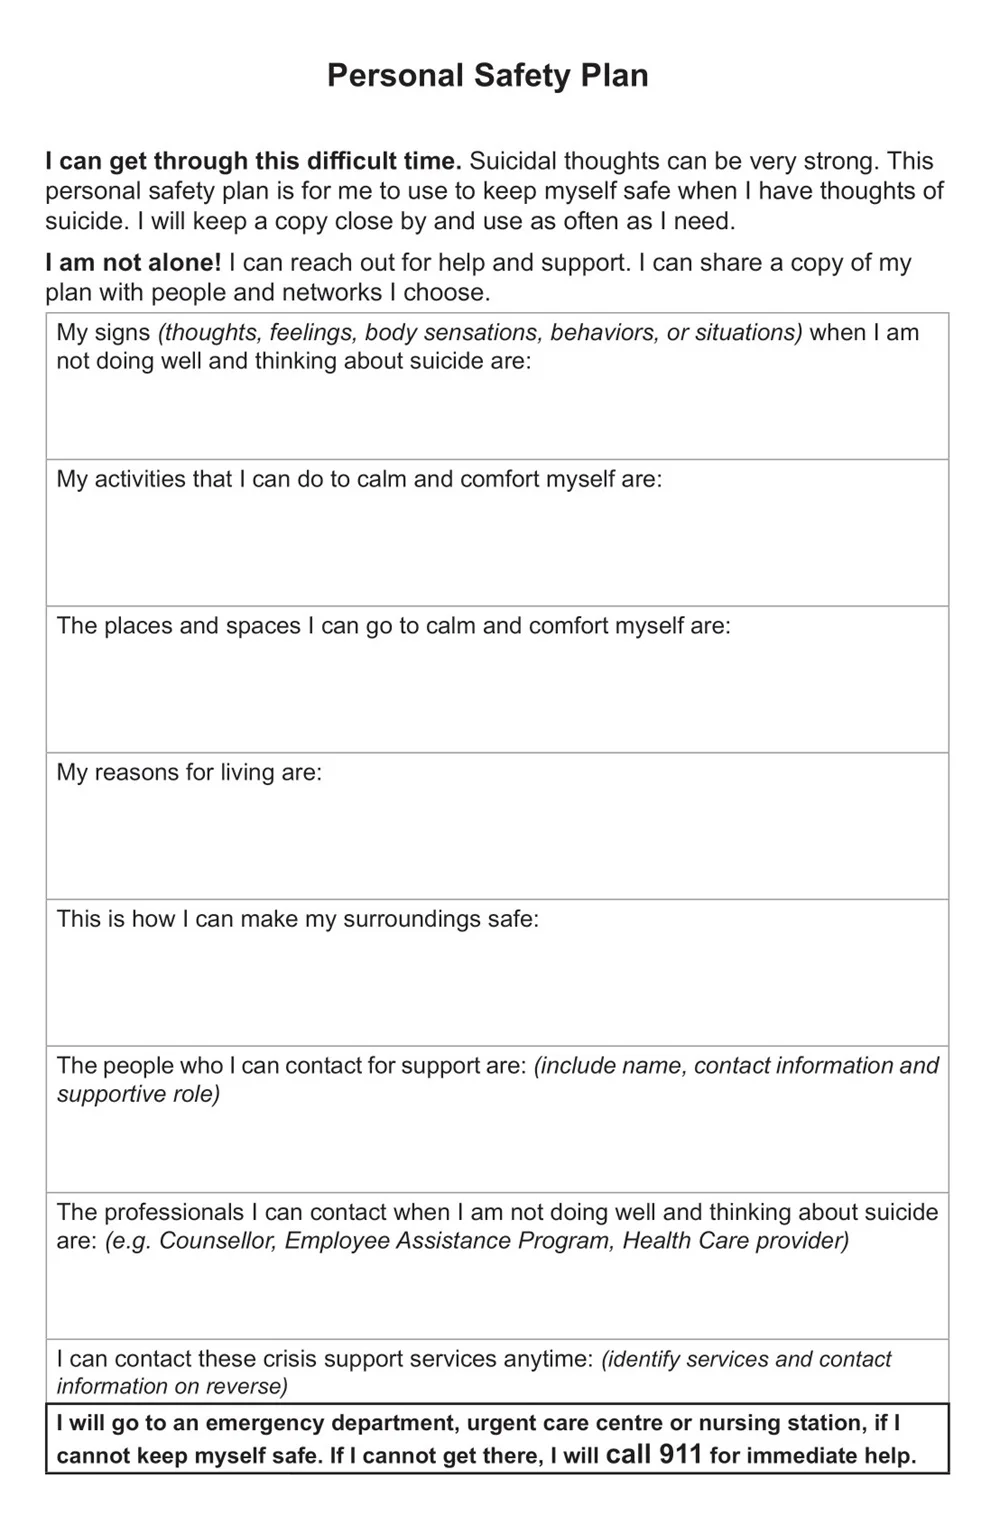 Personal Safety Plan Form